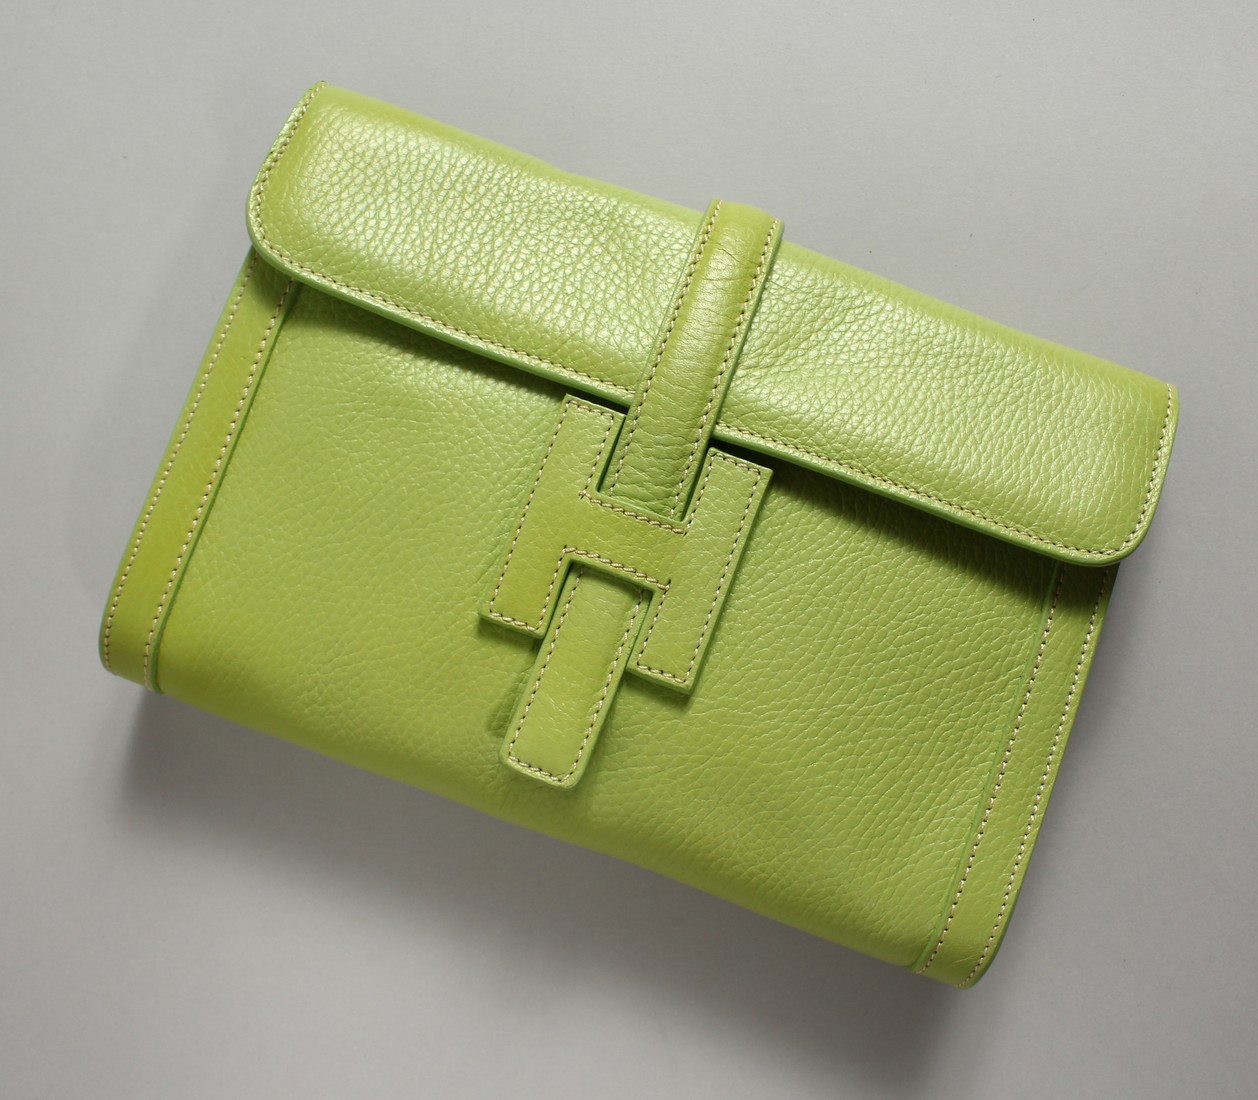 A GREEN LEATHER CLUTCH BAG and strap. 24cm long x 17cm high.